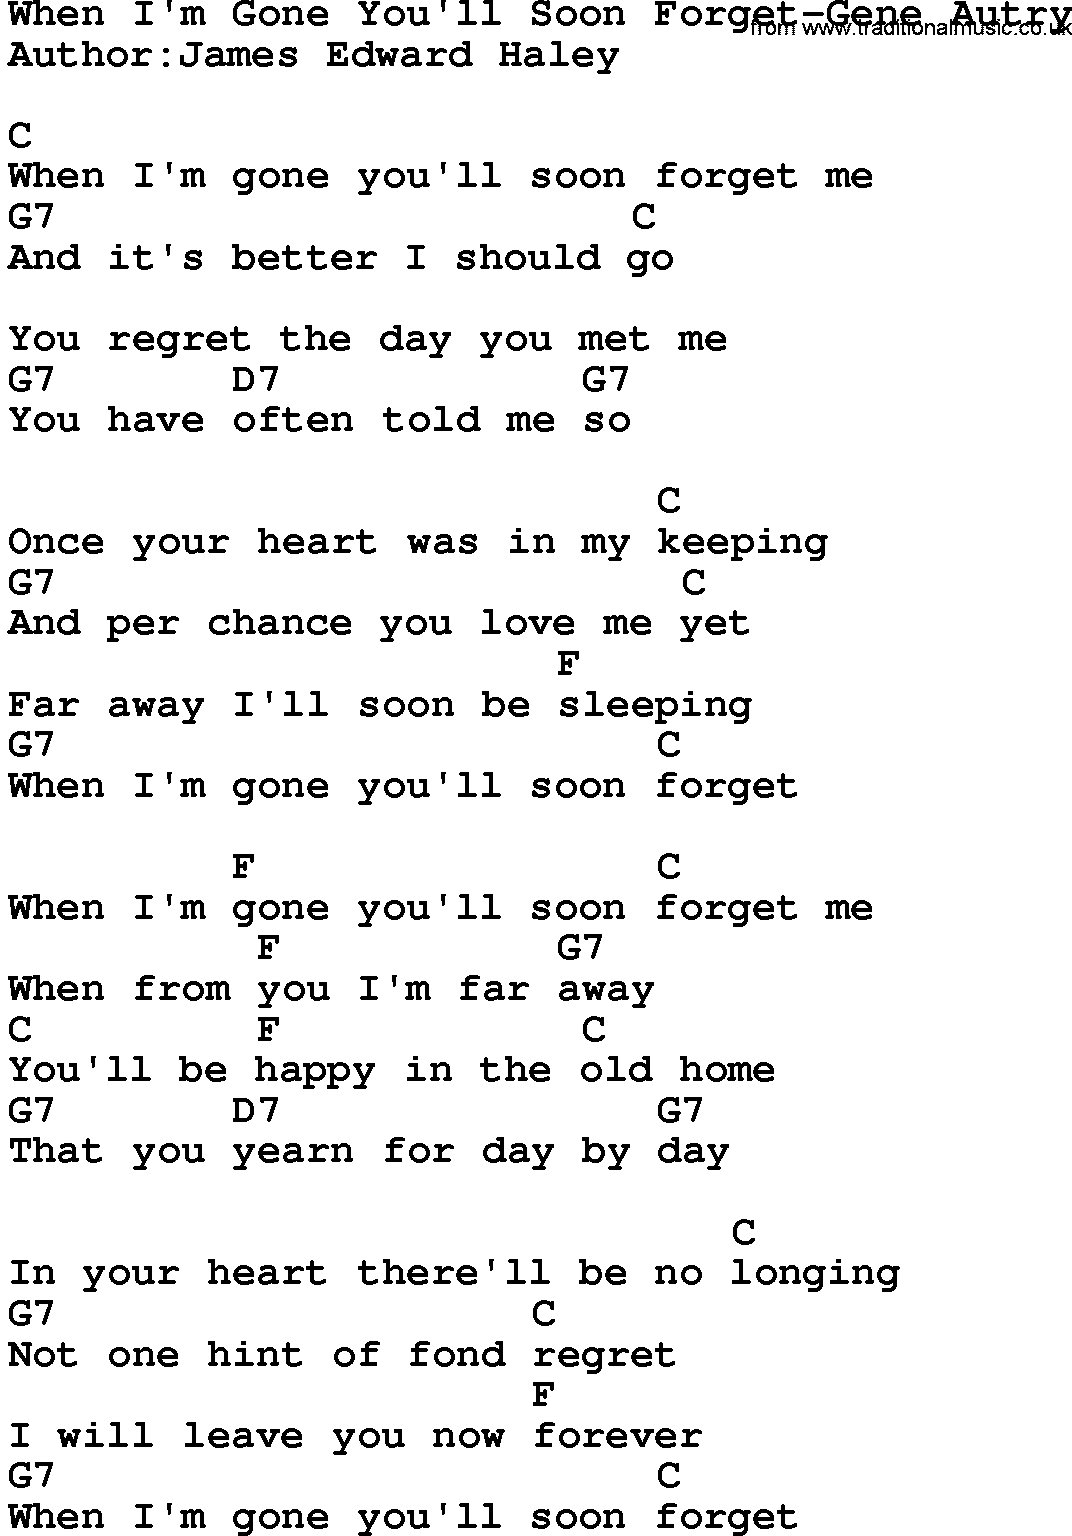 Country music song: When I'm Gone You'll Soon Forget-Gene Autry lyrics and chords